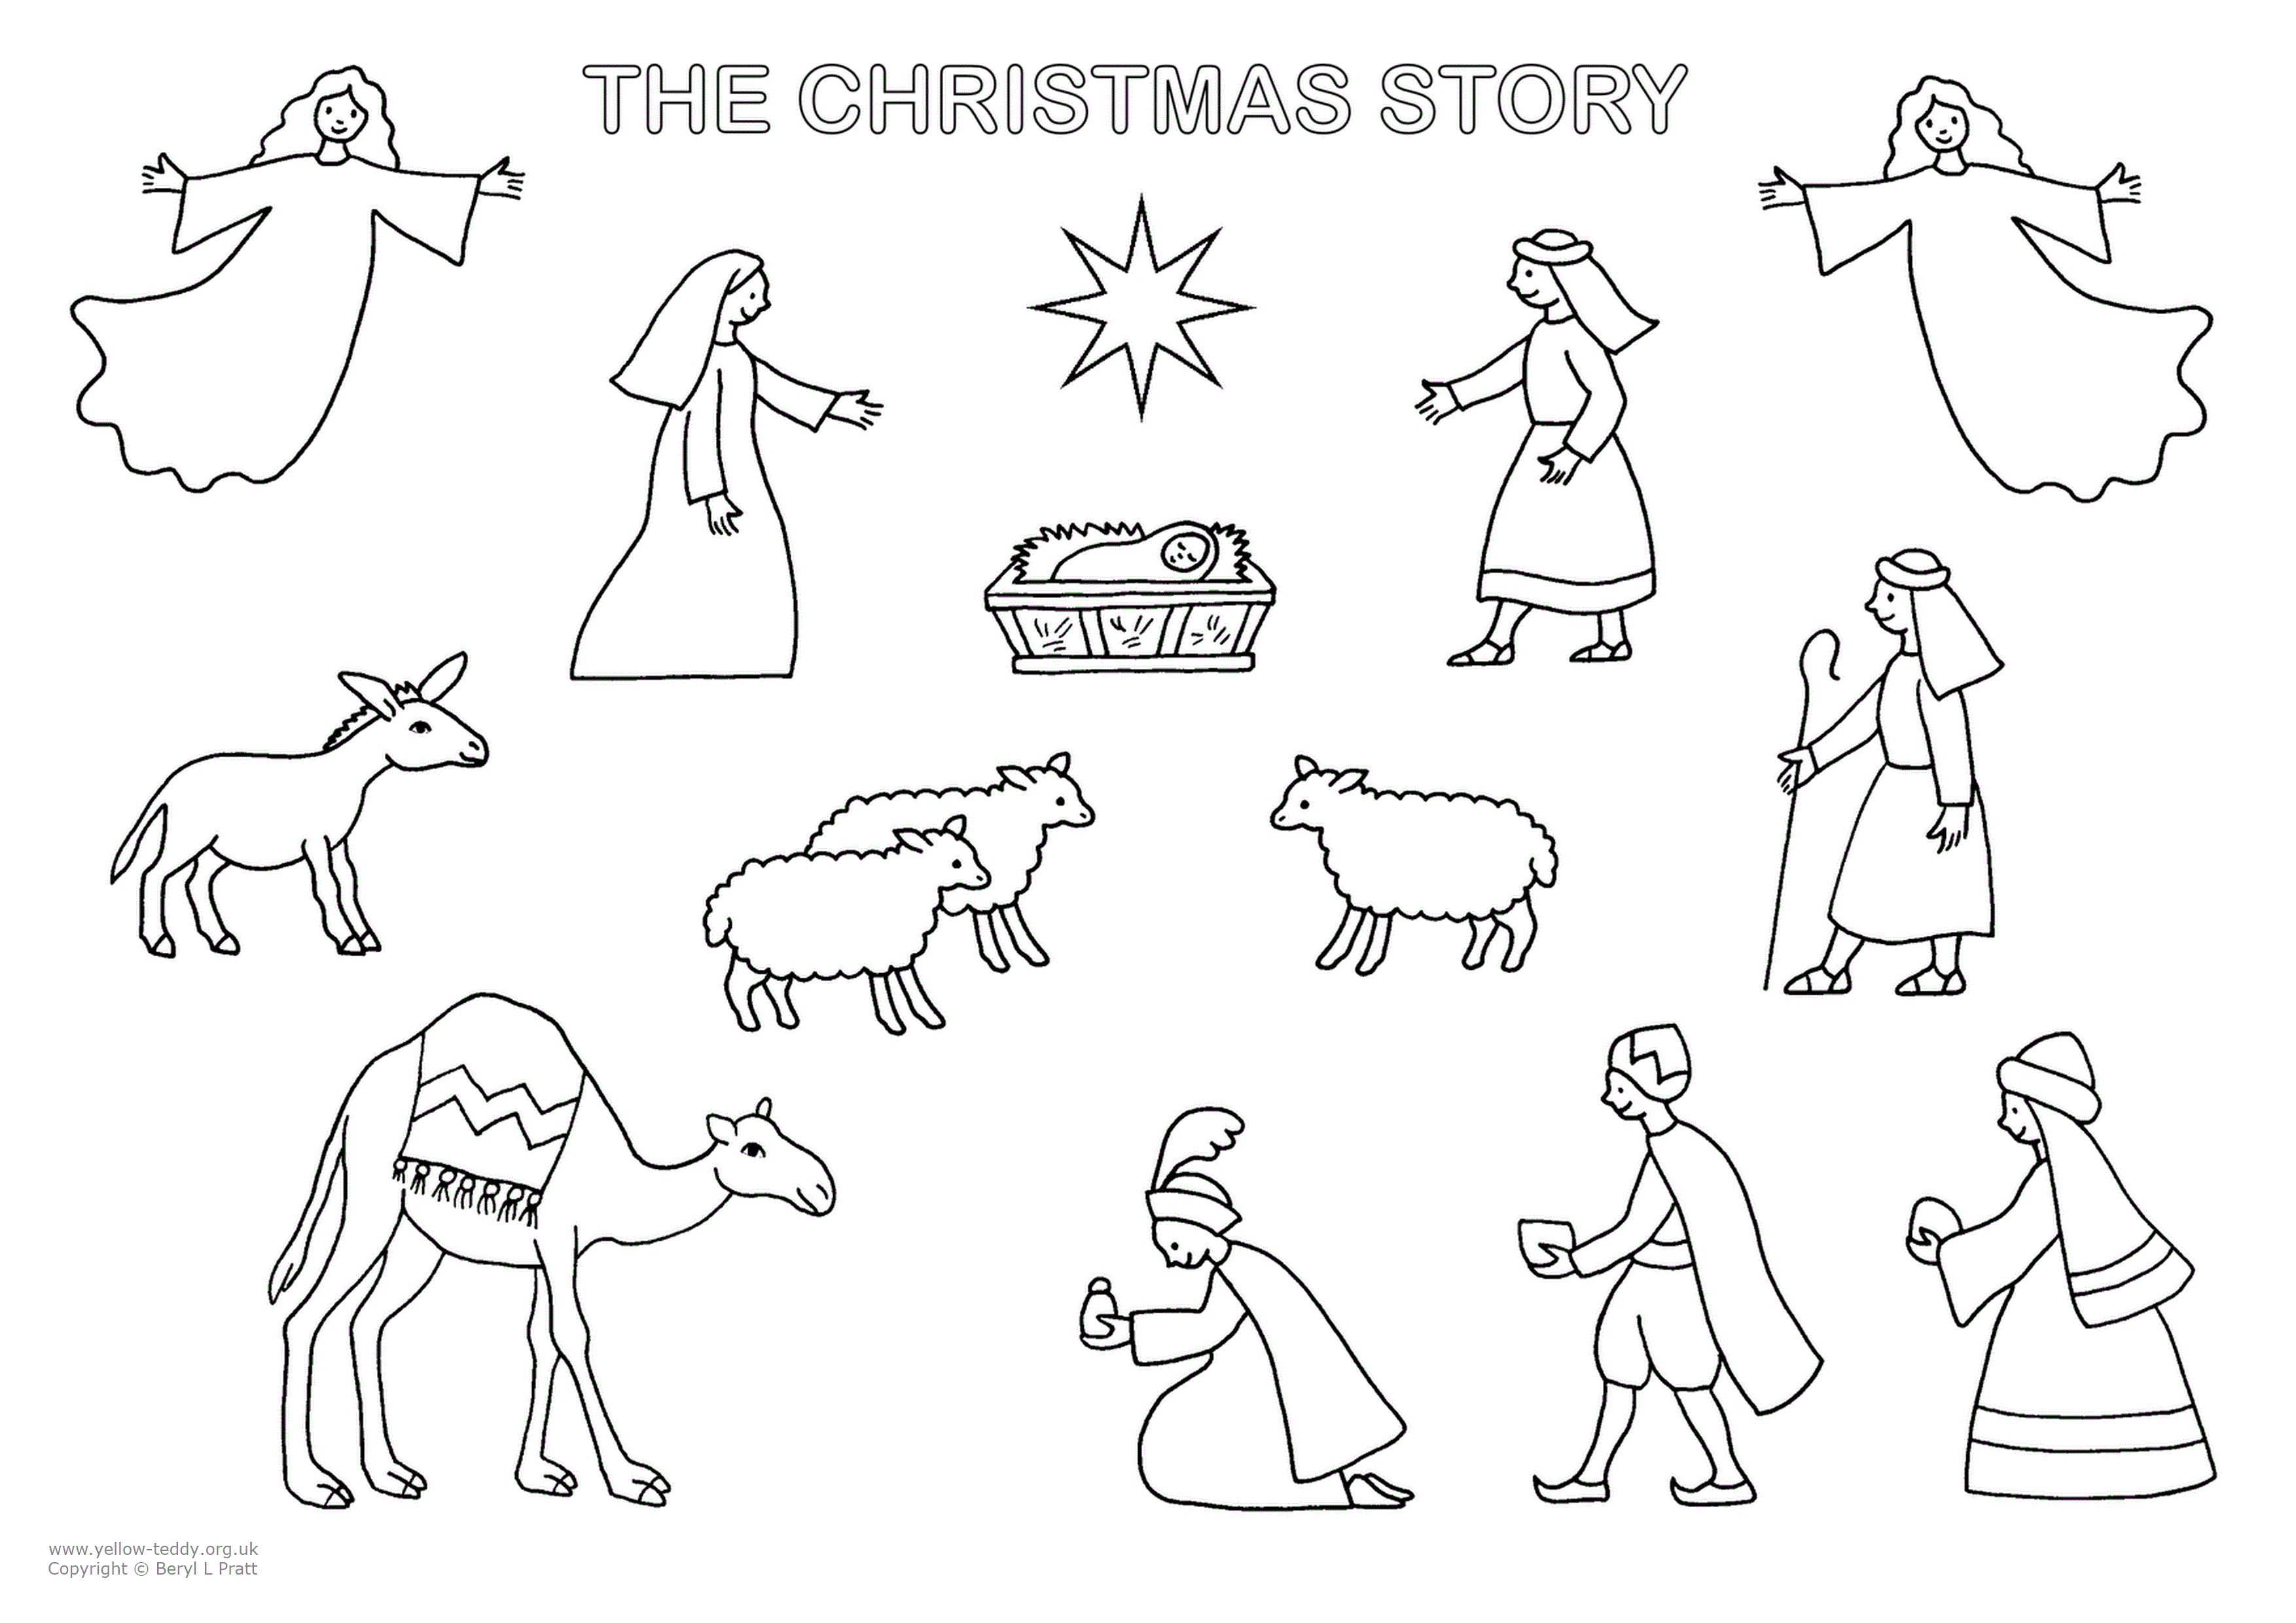 Free Christmas Story colouring picture